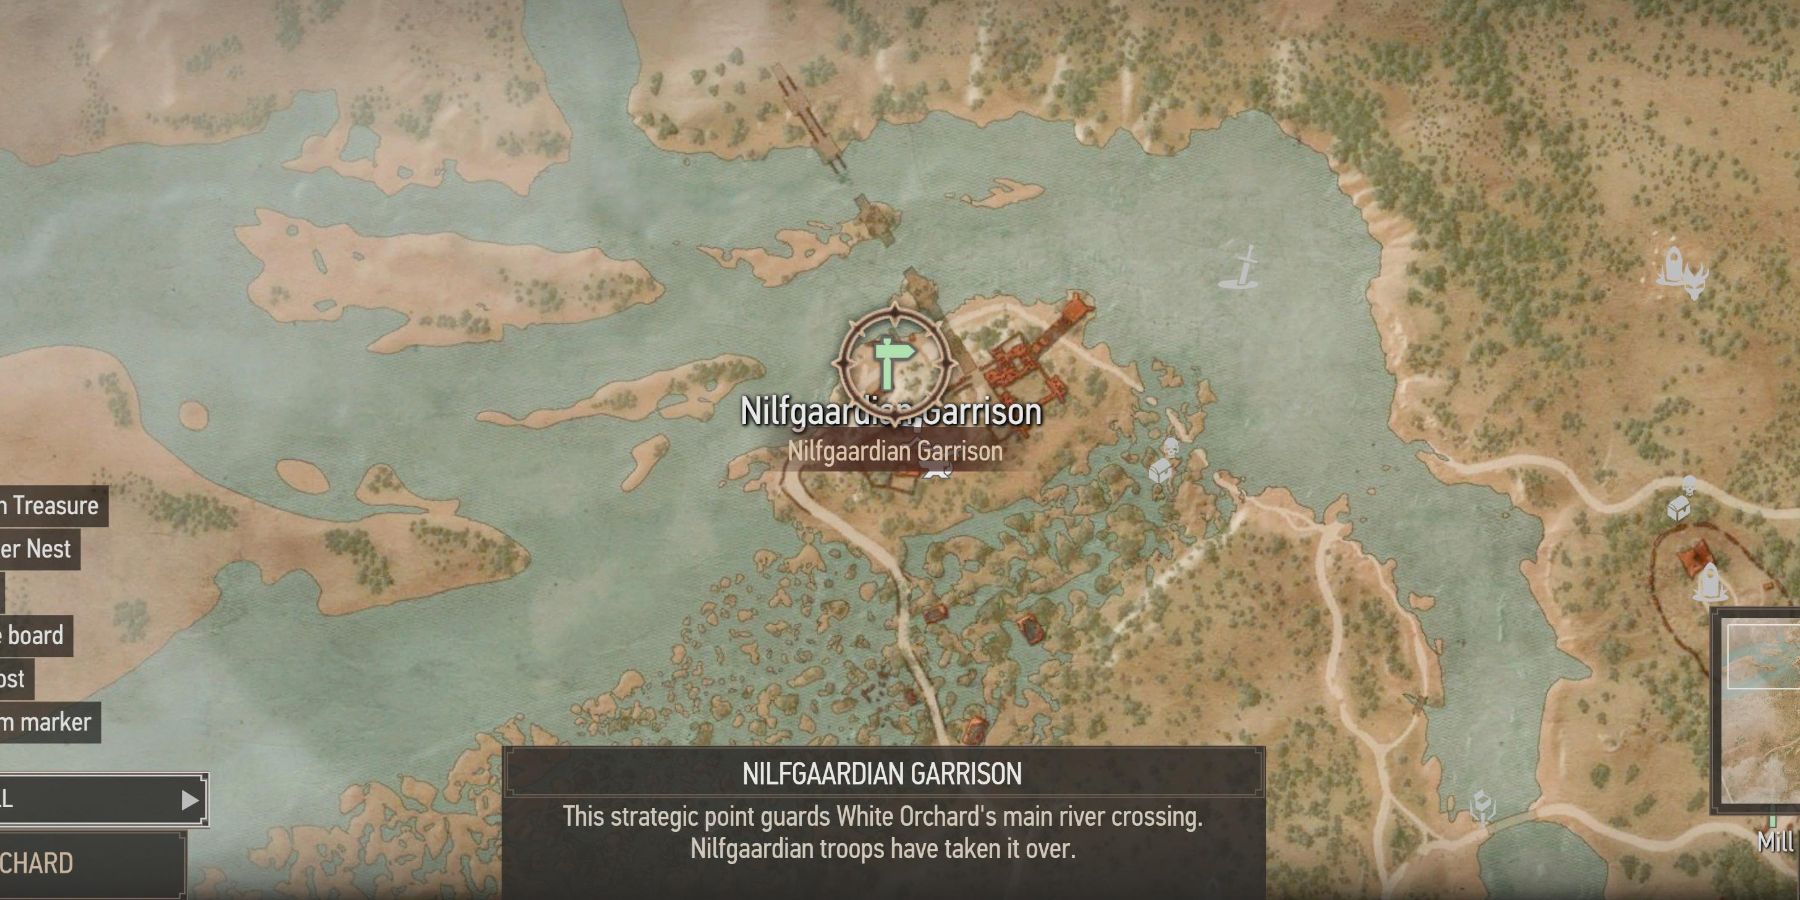 The Witcher 3 Nilgardian Garrison in White Orchid